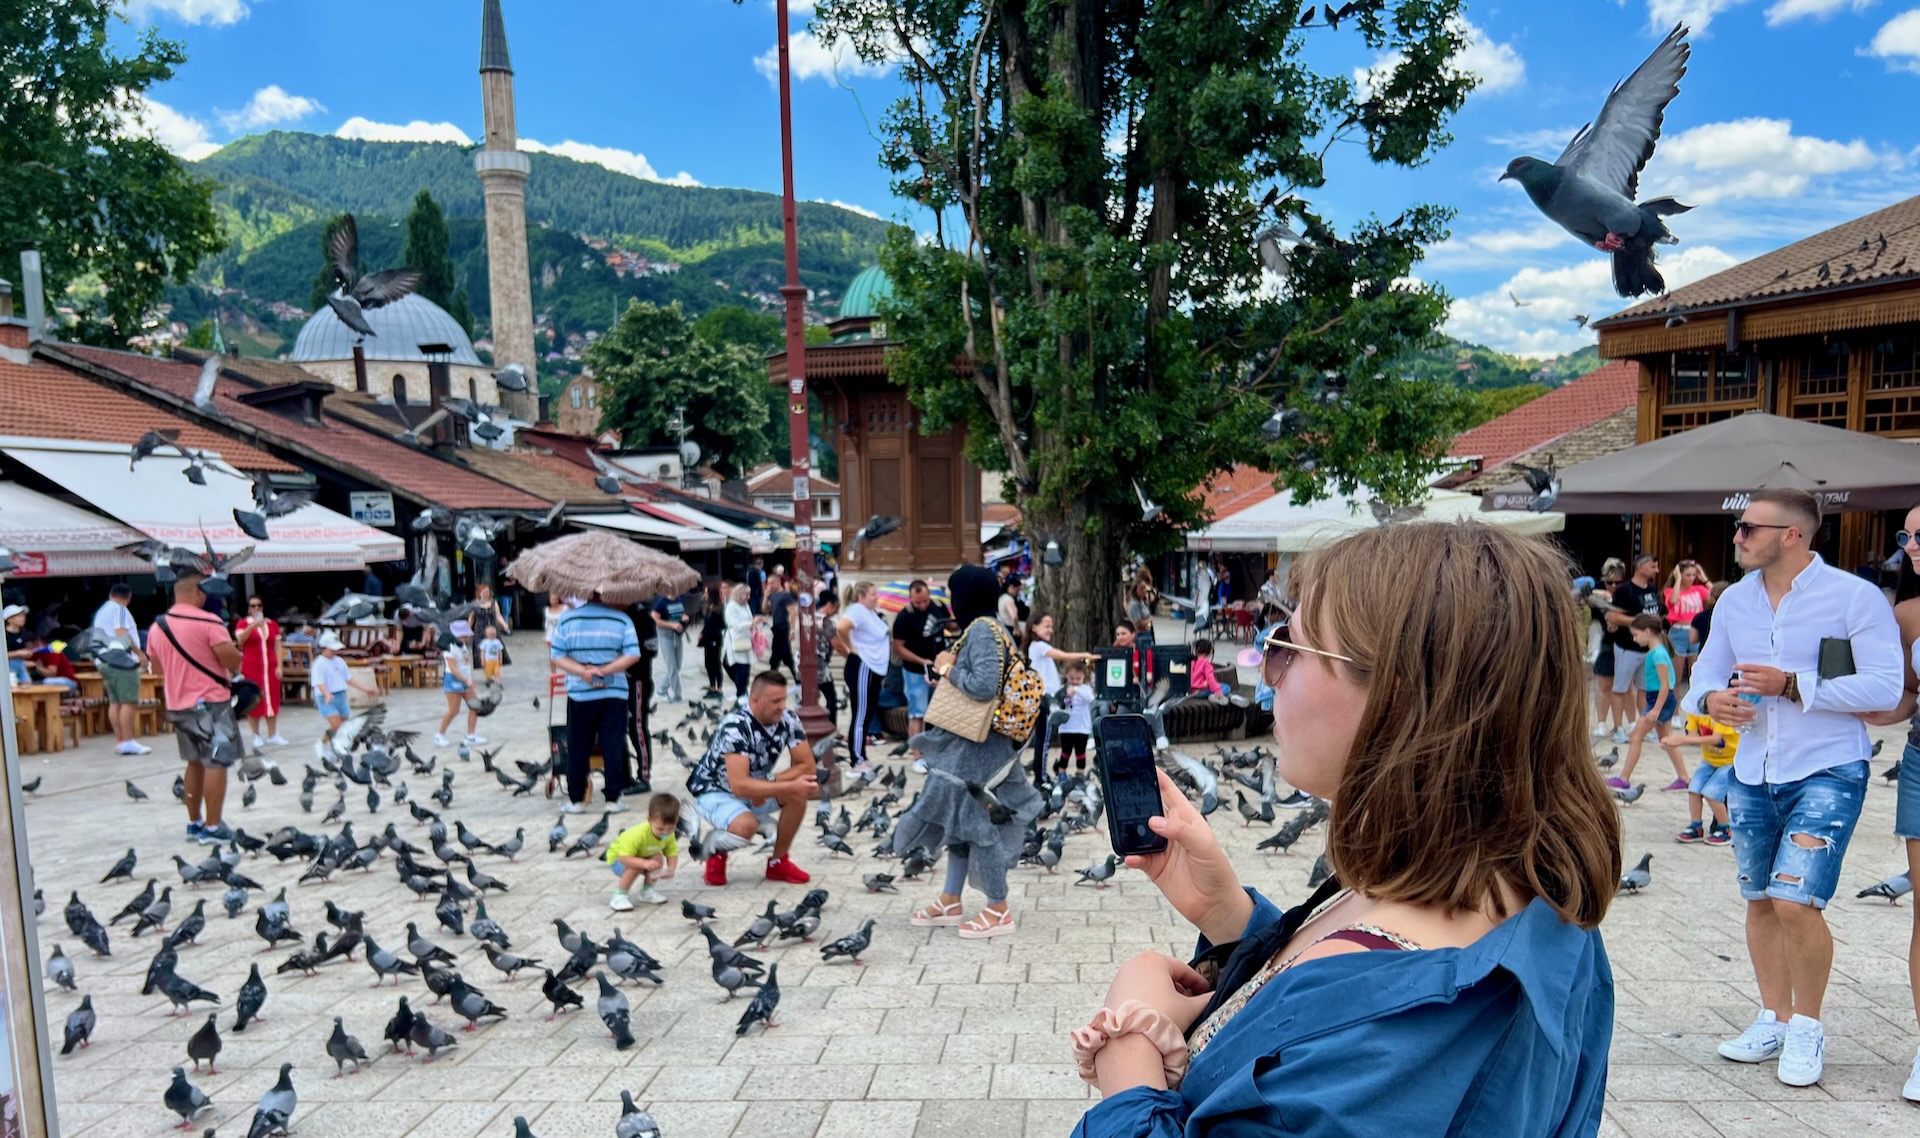 Sarajevo Old Town, with pigeons. You can see the Trebević mountains in the distance from this shot.